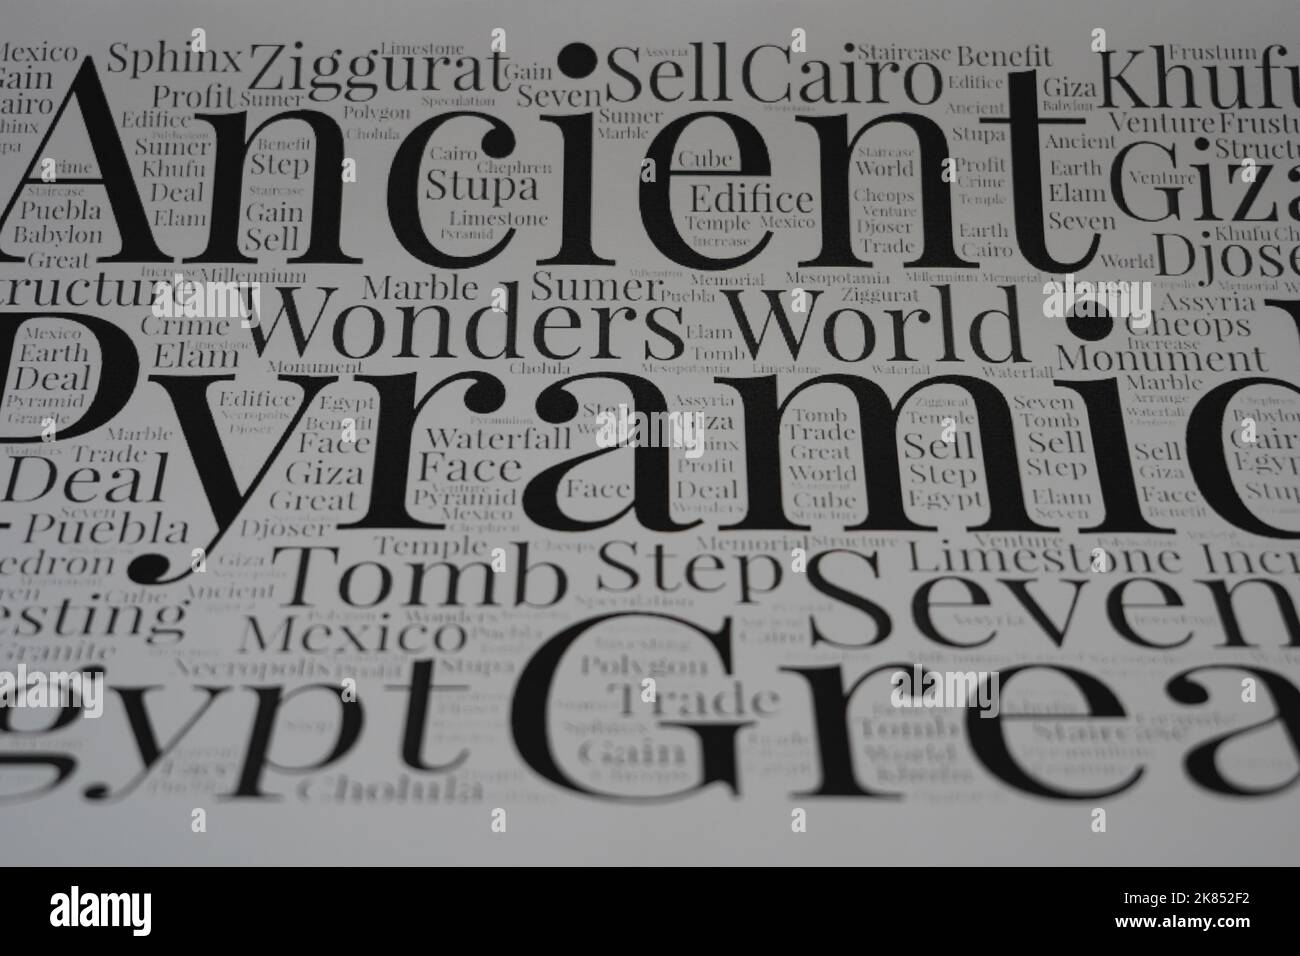 Pyramid word cloud concept. Pyramid word cloud. Made with the text only. Stock Photo